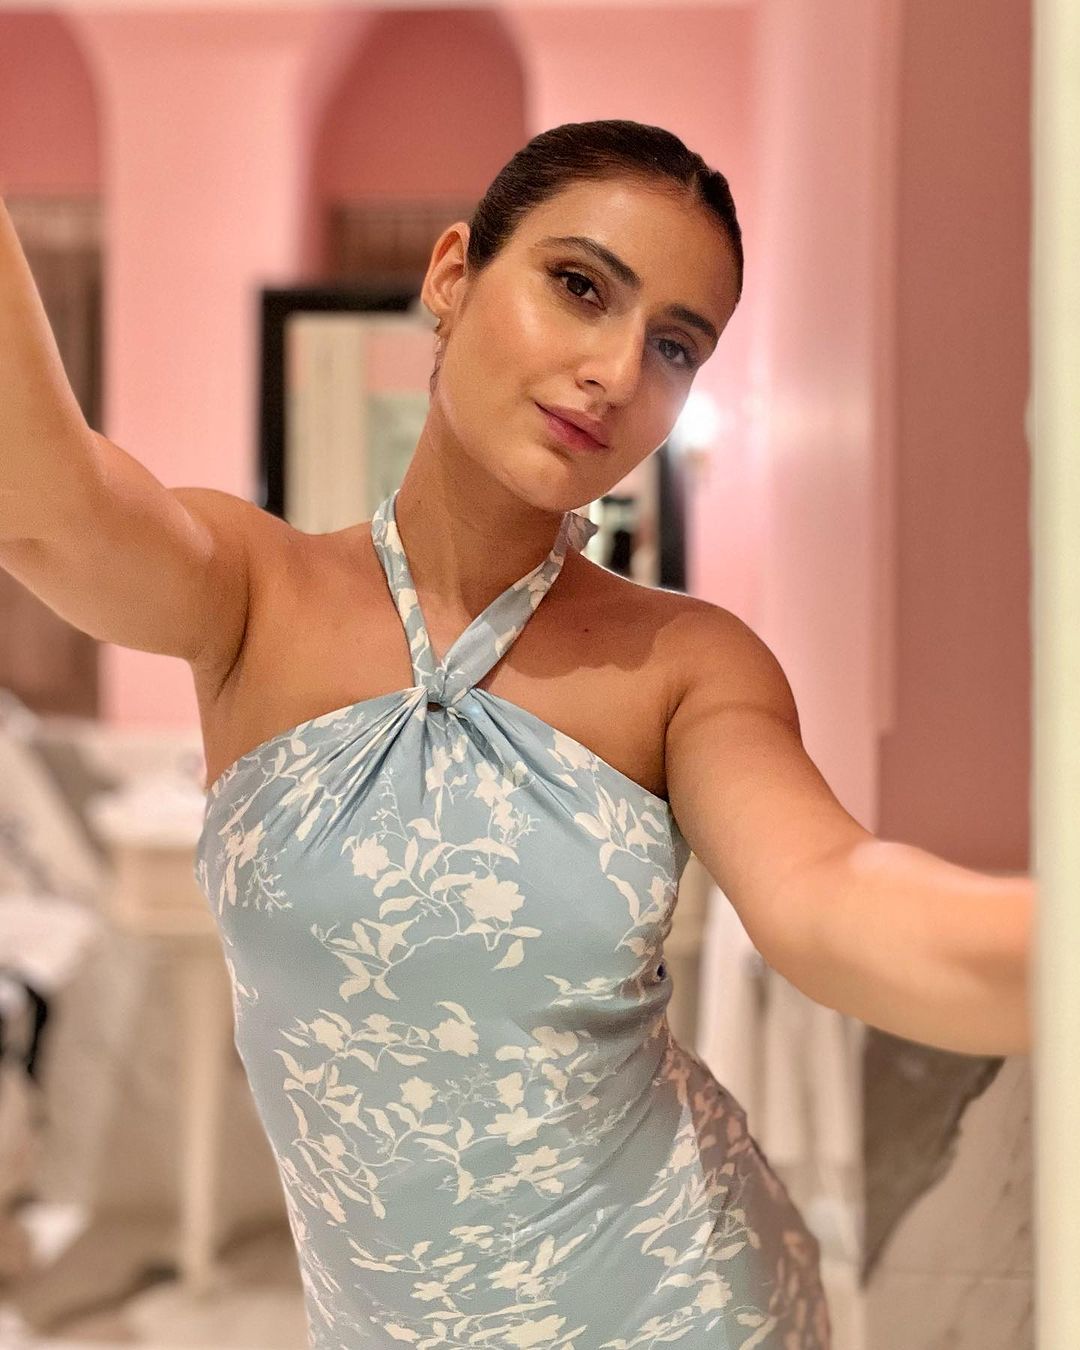 Actress fatima sana shaikh is mesmerizing with her intoxicating beauty-Actressfatima Photos,Spicy Hot Pics,Images,High Resolution WallPapers Download